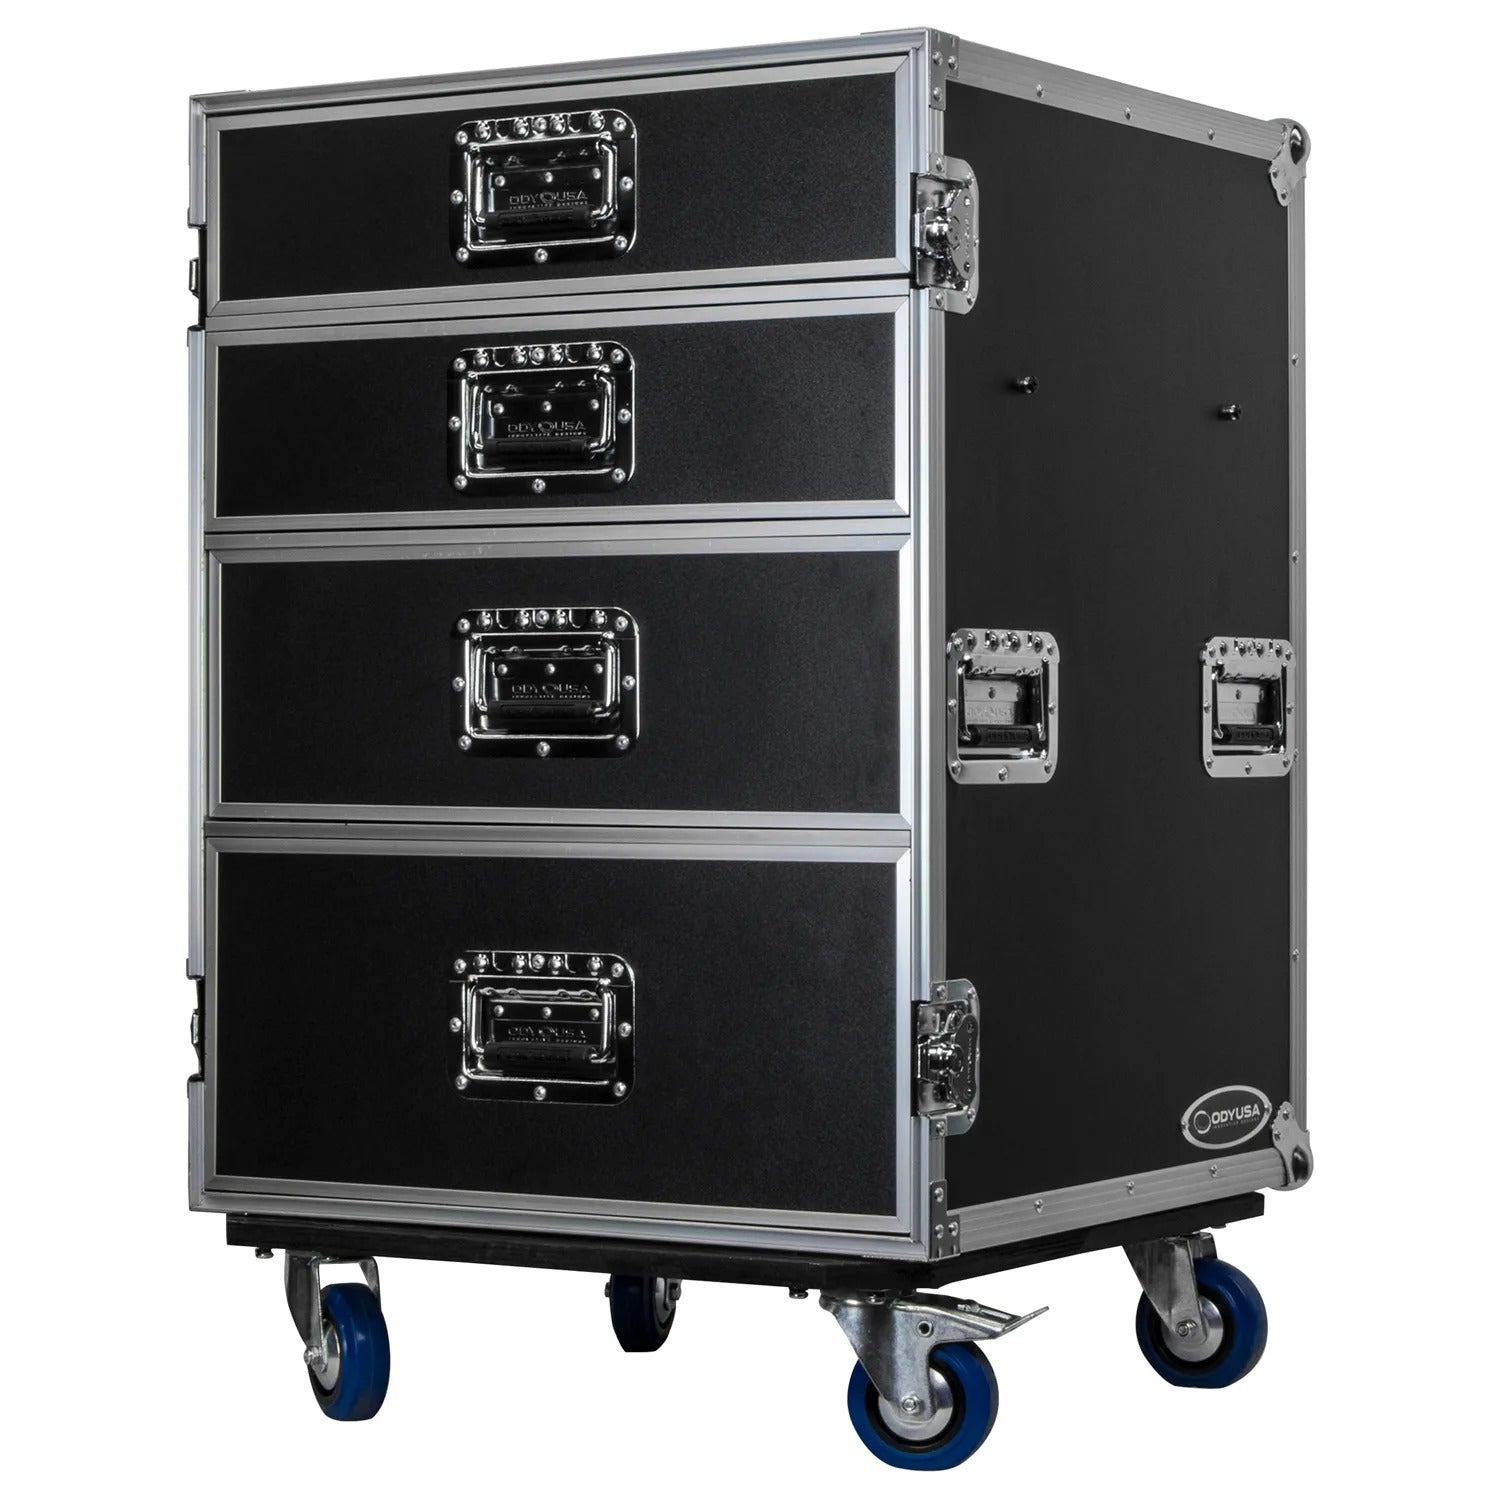 Odyssey FZWB4WDLX DJ Flight Case for Deluxe Four Drawer Workbox Tour with Casters And Side Table Odyssey